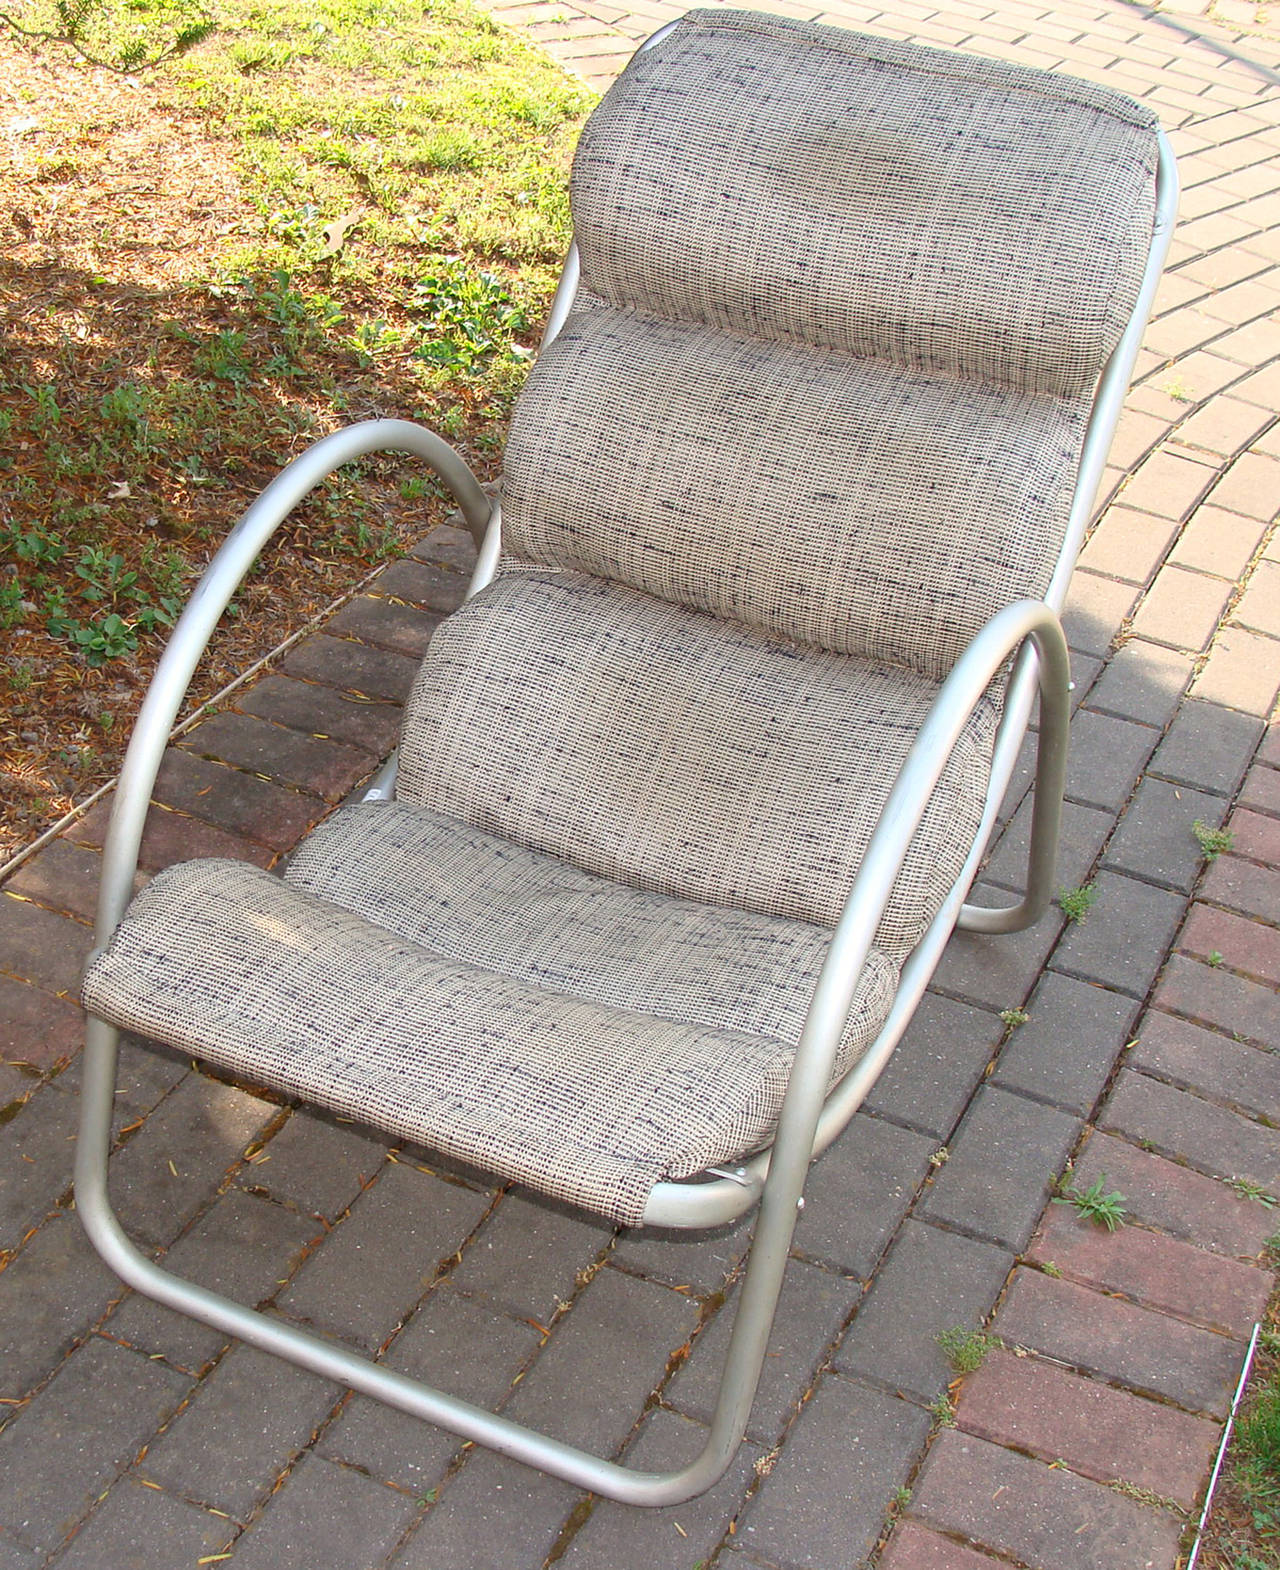 This is a rare, labeled example of early California streamlined modernism.

Fabric upholstery follows original structure, appears to be 1970-1980 origin with some soiling. Aluminum frame exhibits a few minor scuffs to finish but no